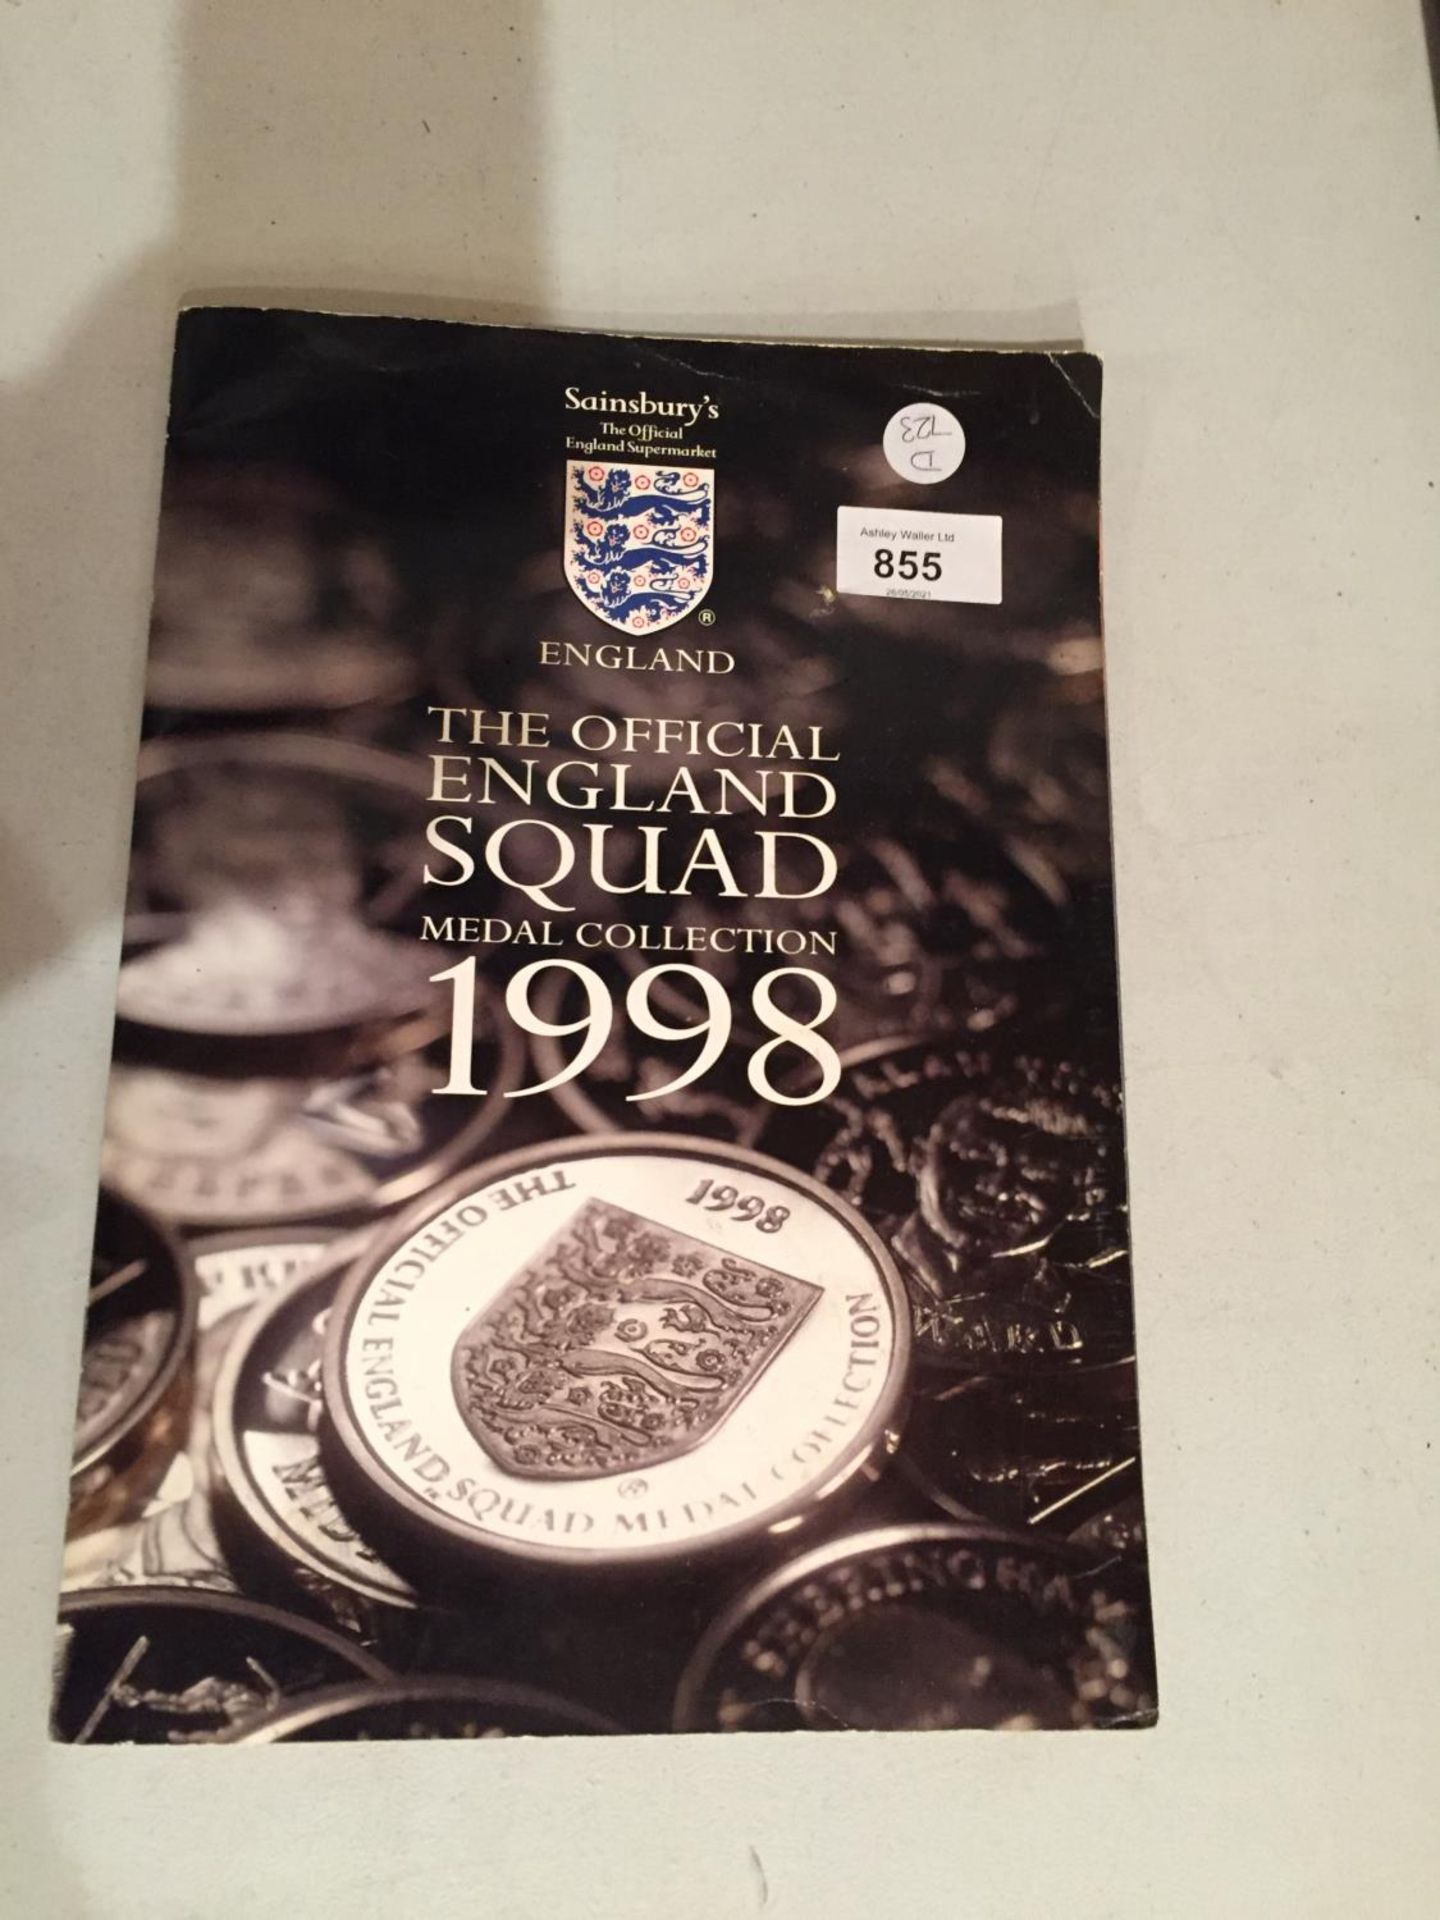 THE OFFICIAL ENGLAND SQUAD 1998 MEDAL COLLECTION